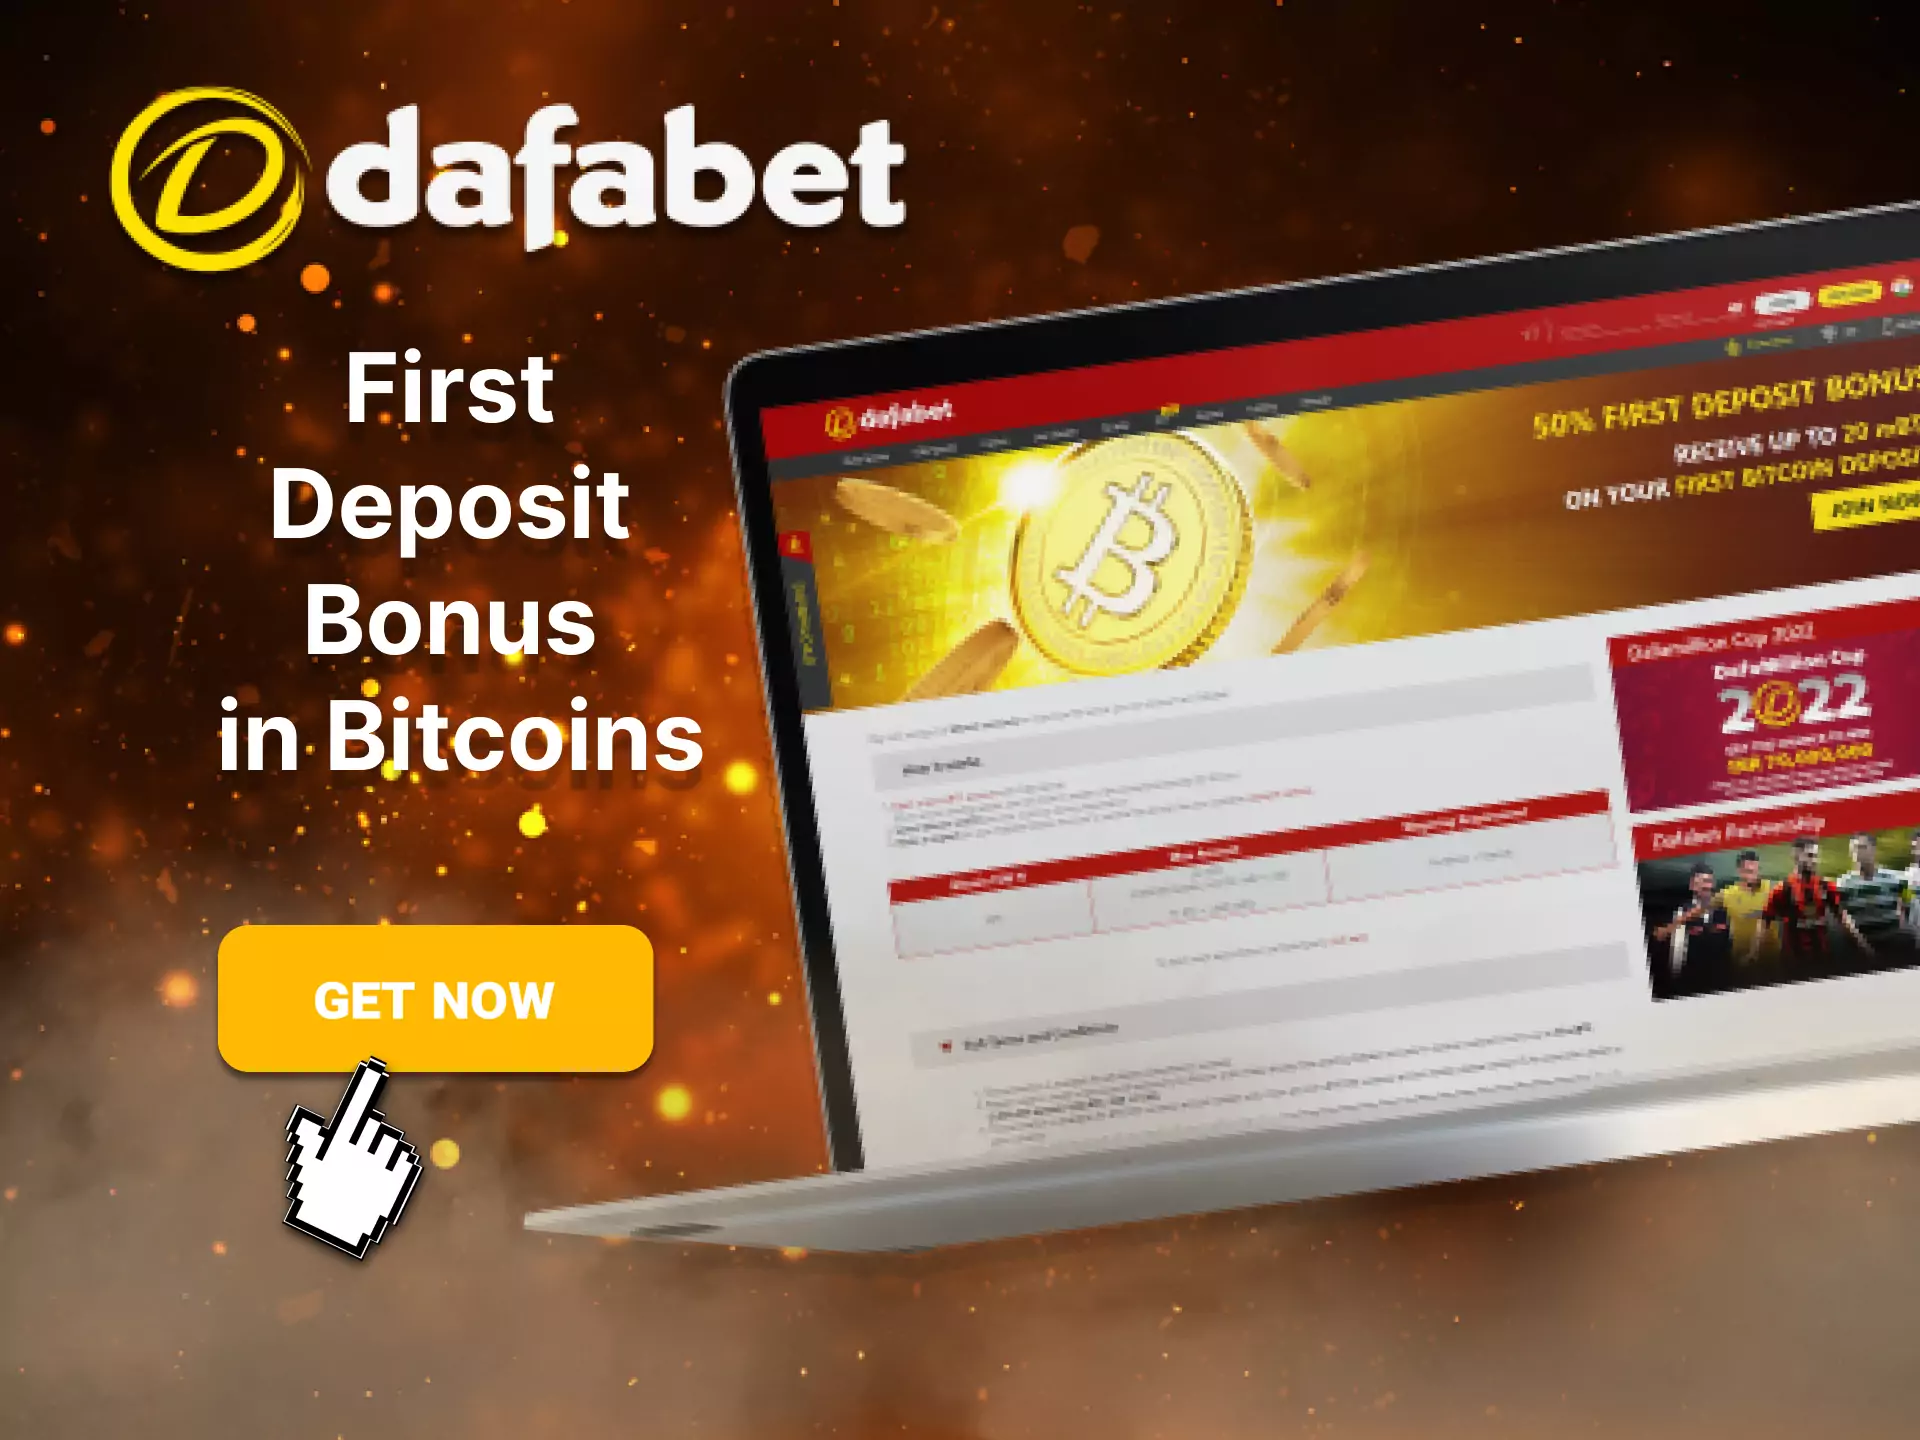 In Dafabet, make your first deposit with bitcoins and get a special bonus.